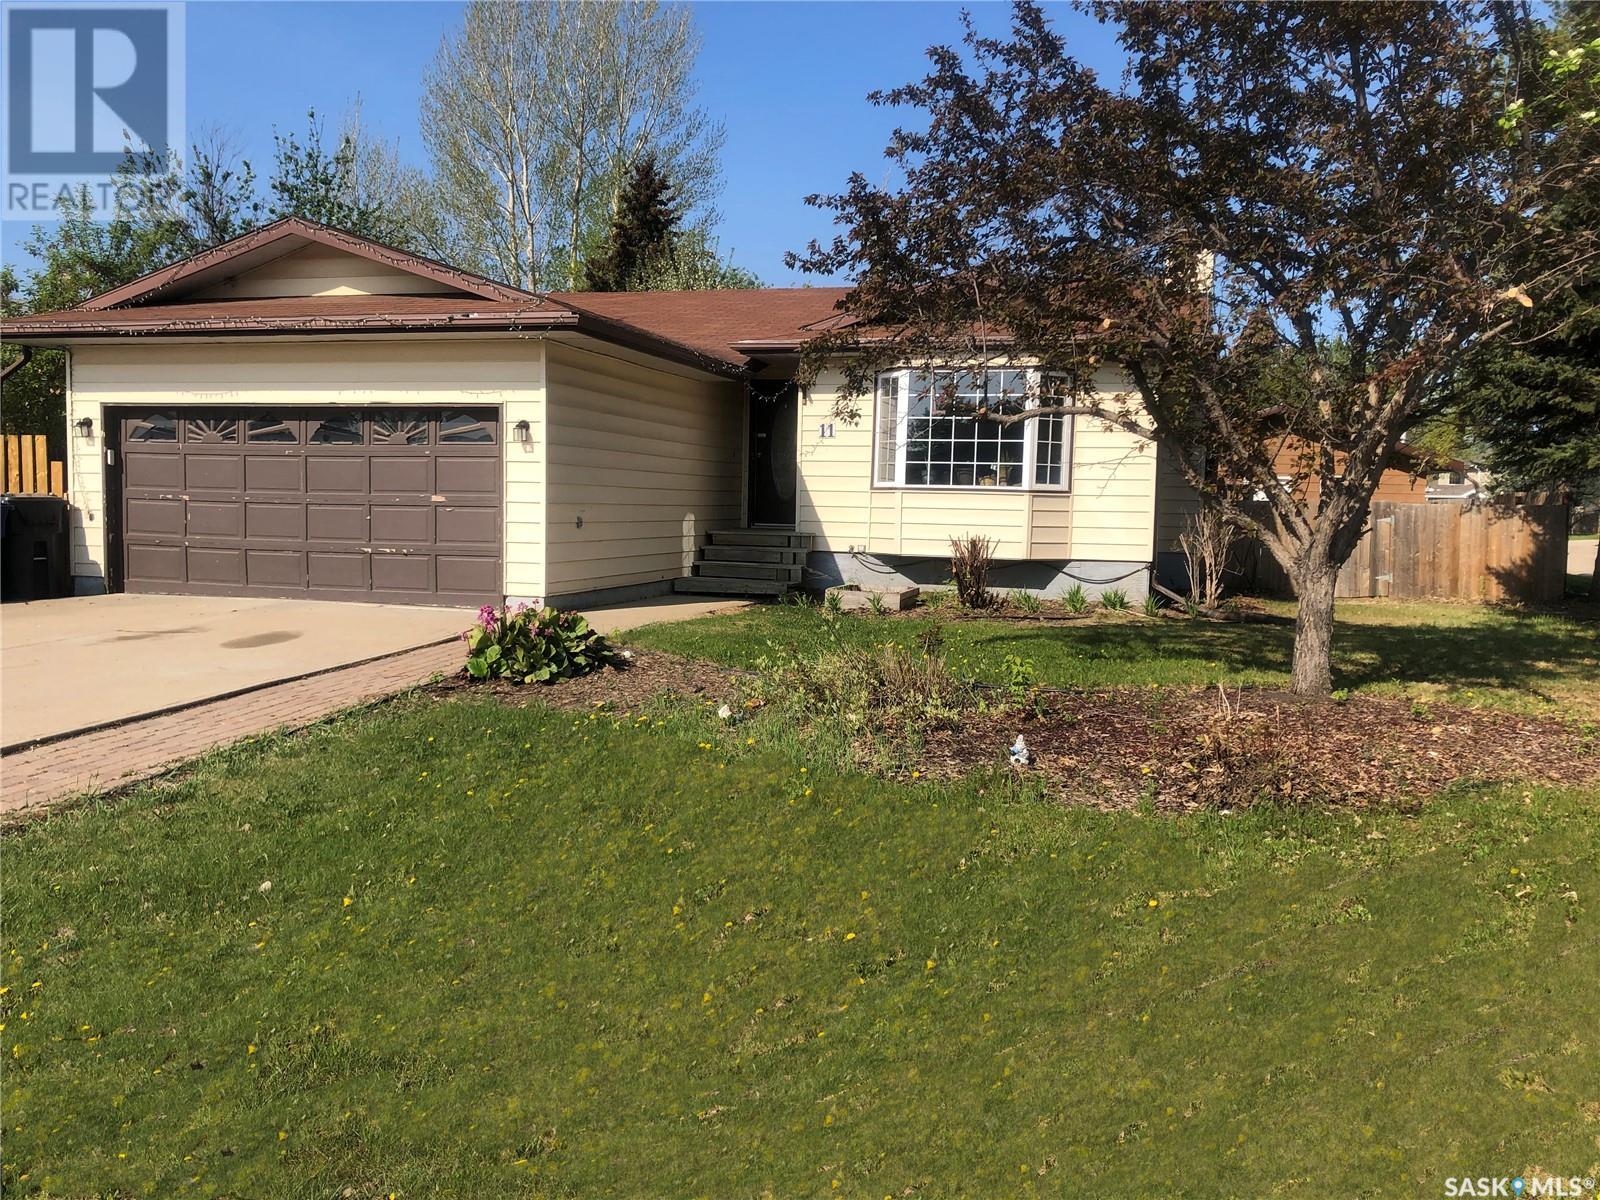 11 Coupland CRESCENT located in Meadow Lake, Saskatchewan